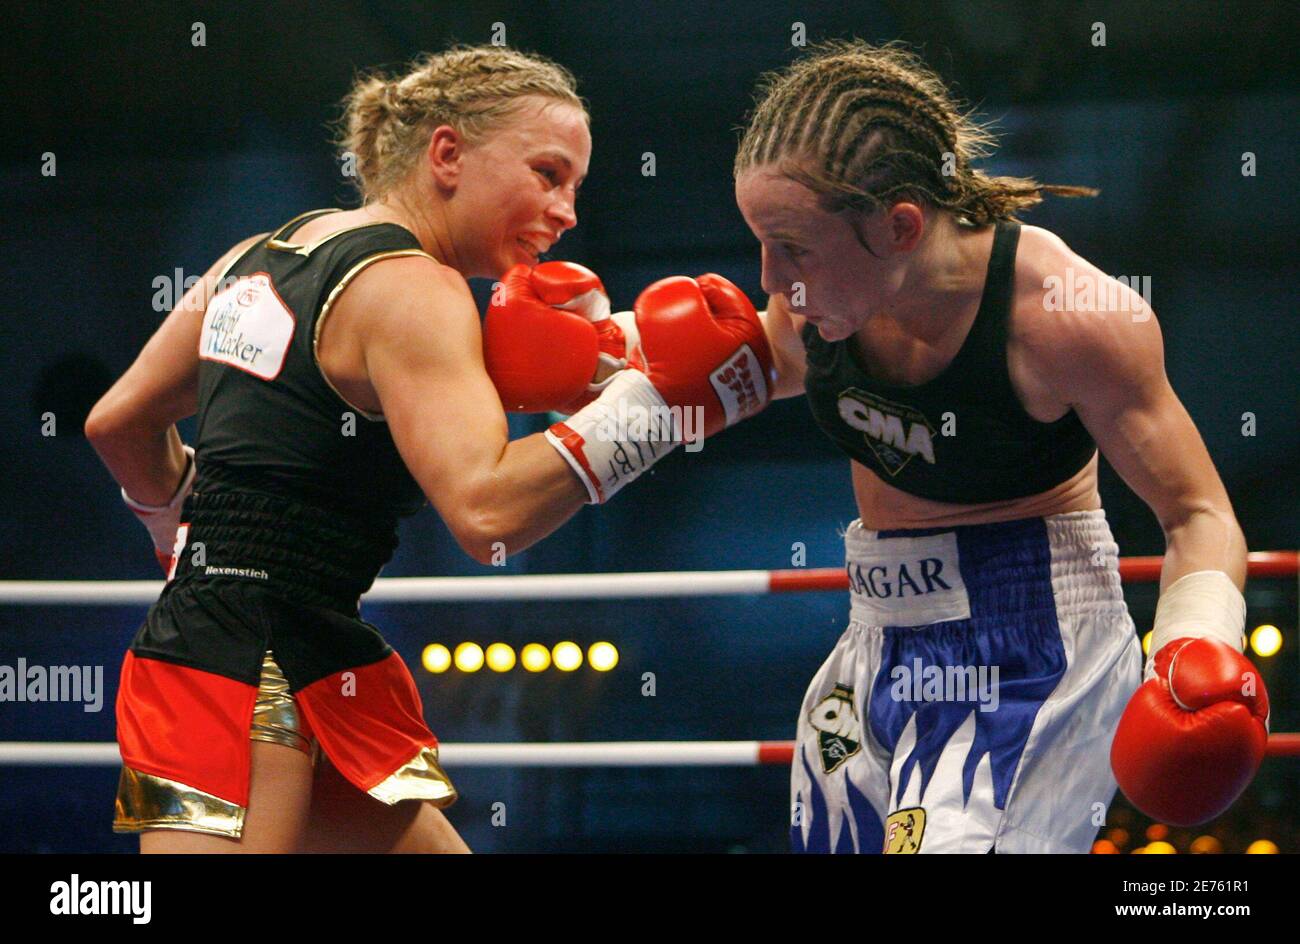 German Regina Halmich (L) punches Hagar Shmoulefeld Finer of Israel during  their WIBF Flyweight Championship boxing fight in Karlsruhe November 30,  2007. Halmich retired after the fight. REUTERS/Alex Grimm (GERMANY Stock  Photo -